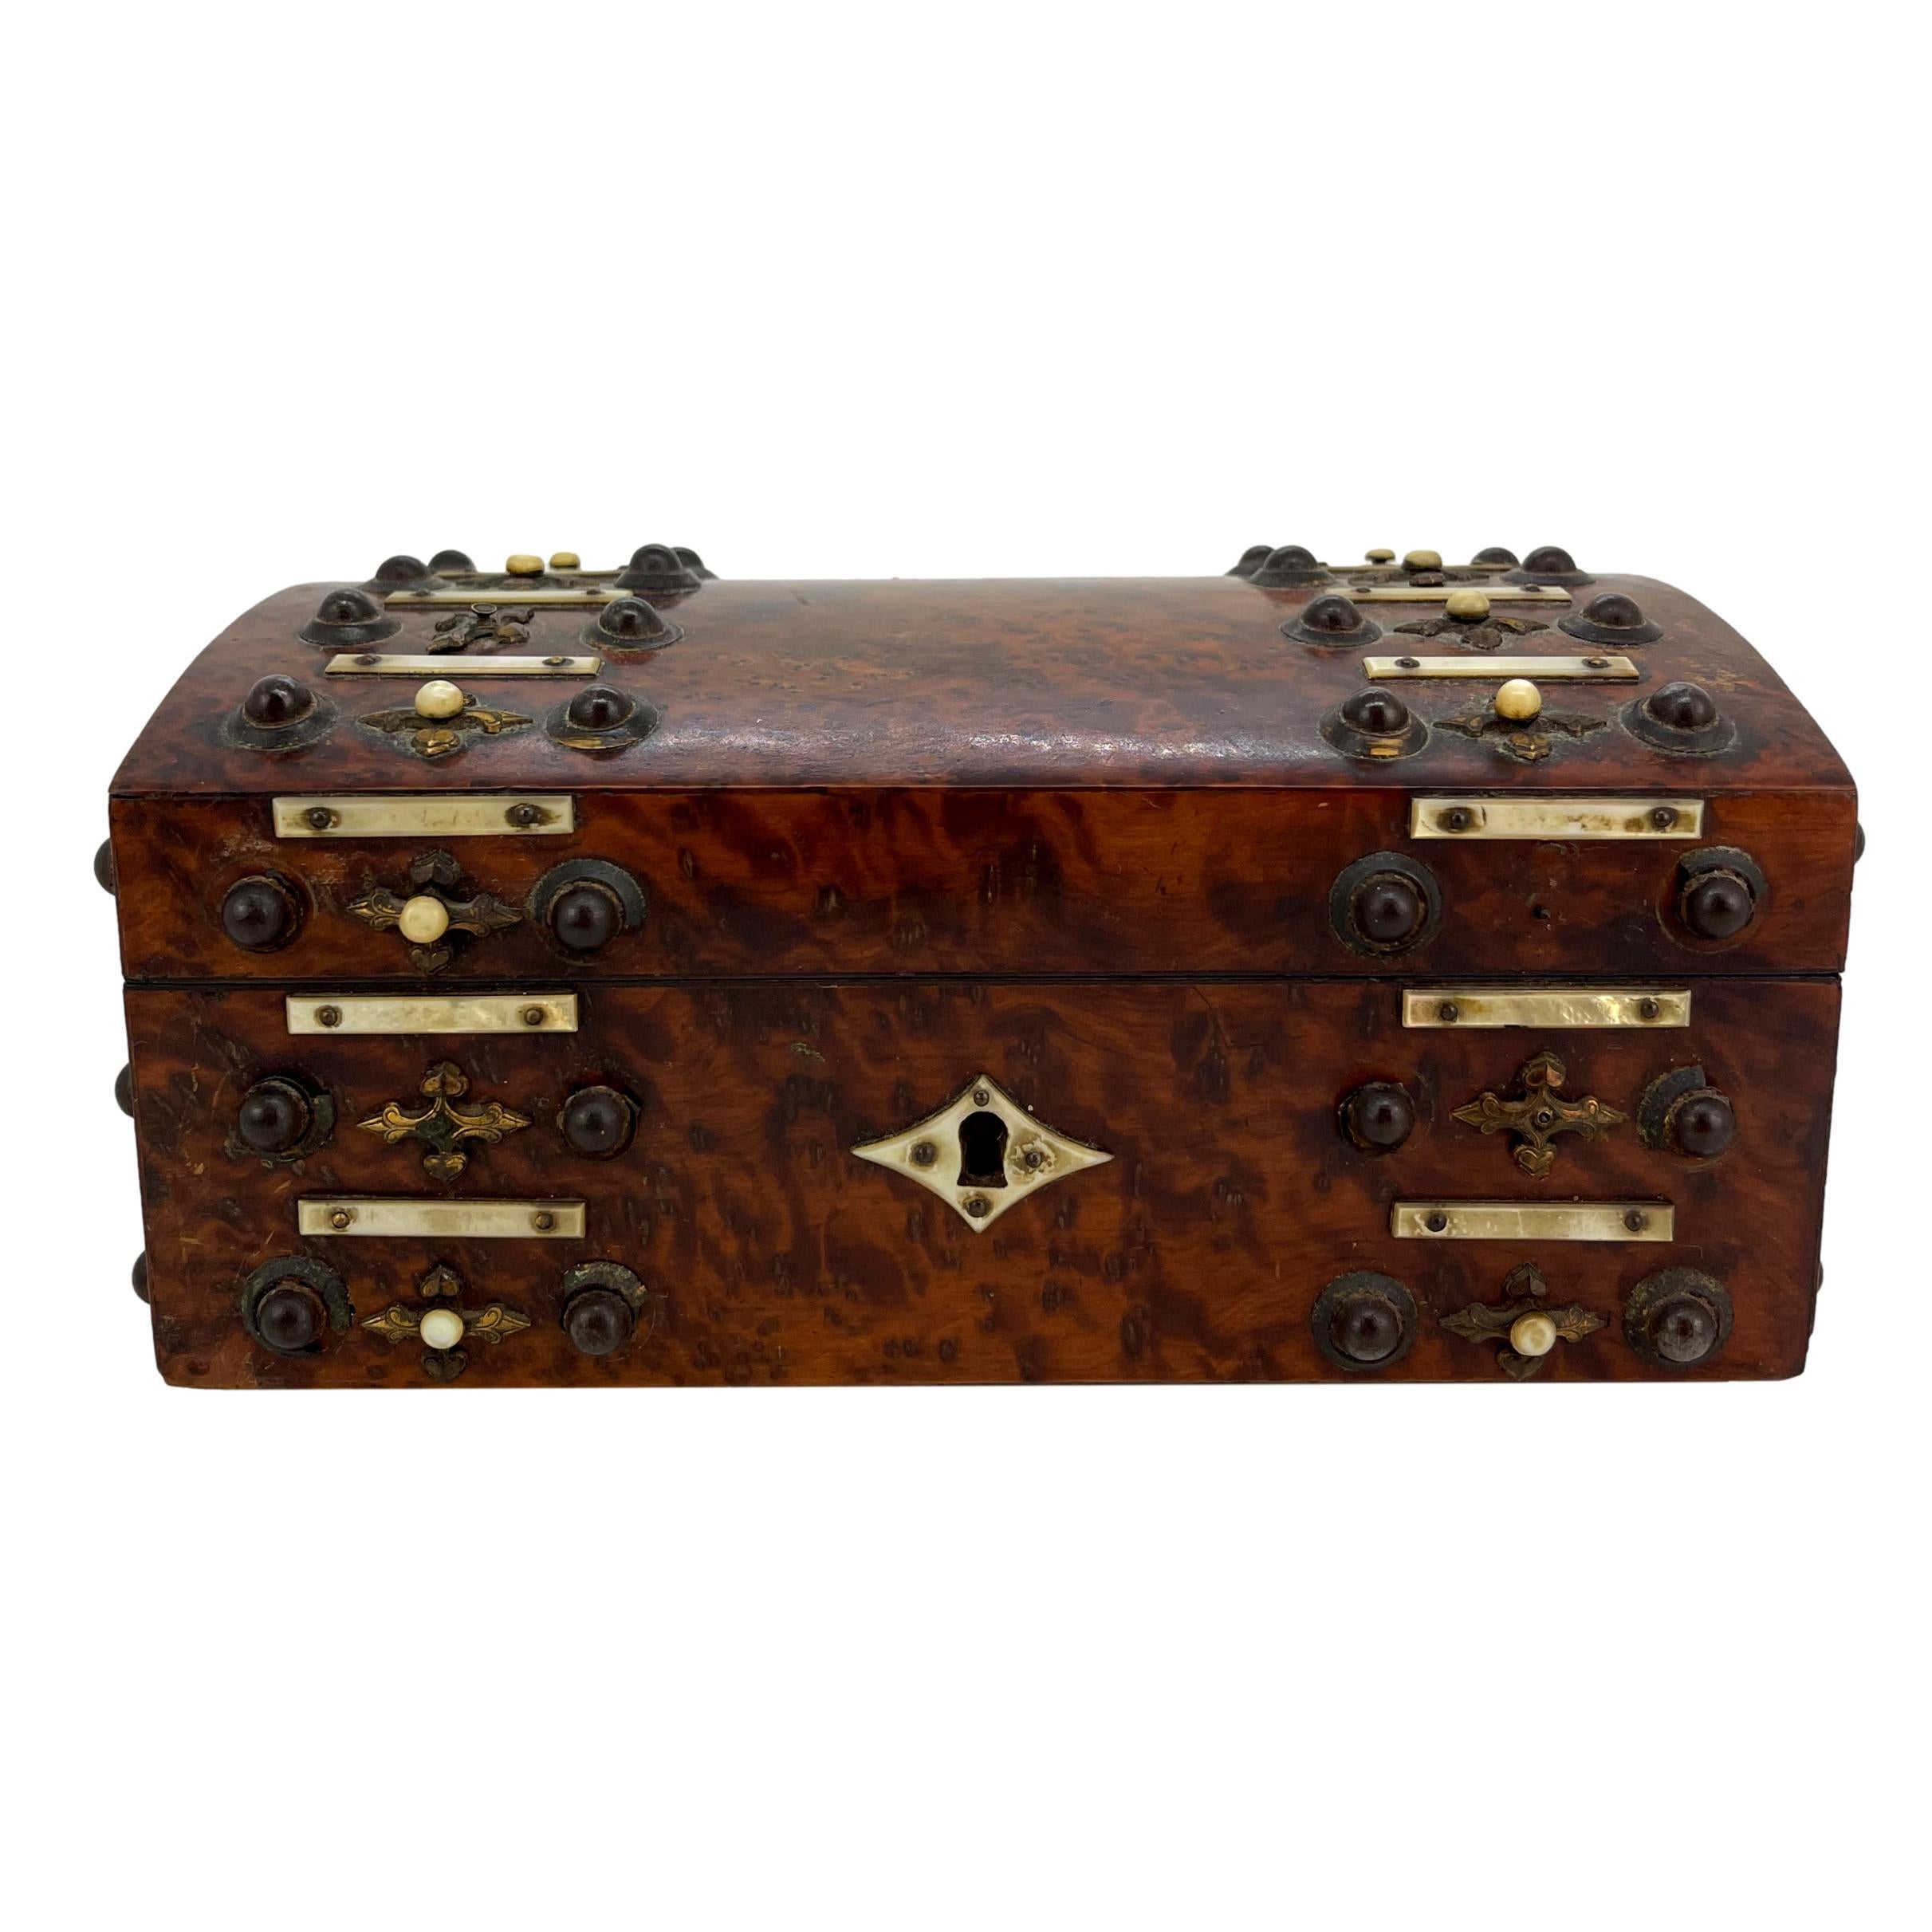 Burl walnut and engraved brass dome-sewing box with mother-of-pearl, English, ca. 1860.